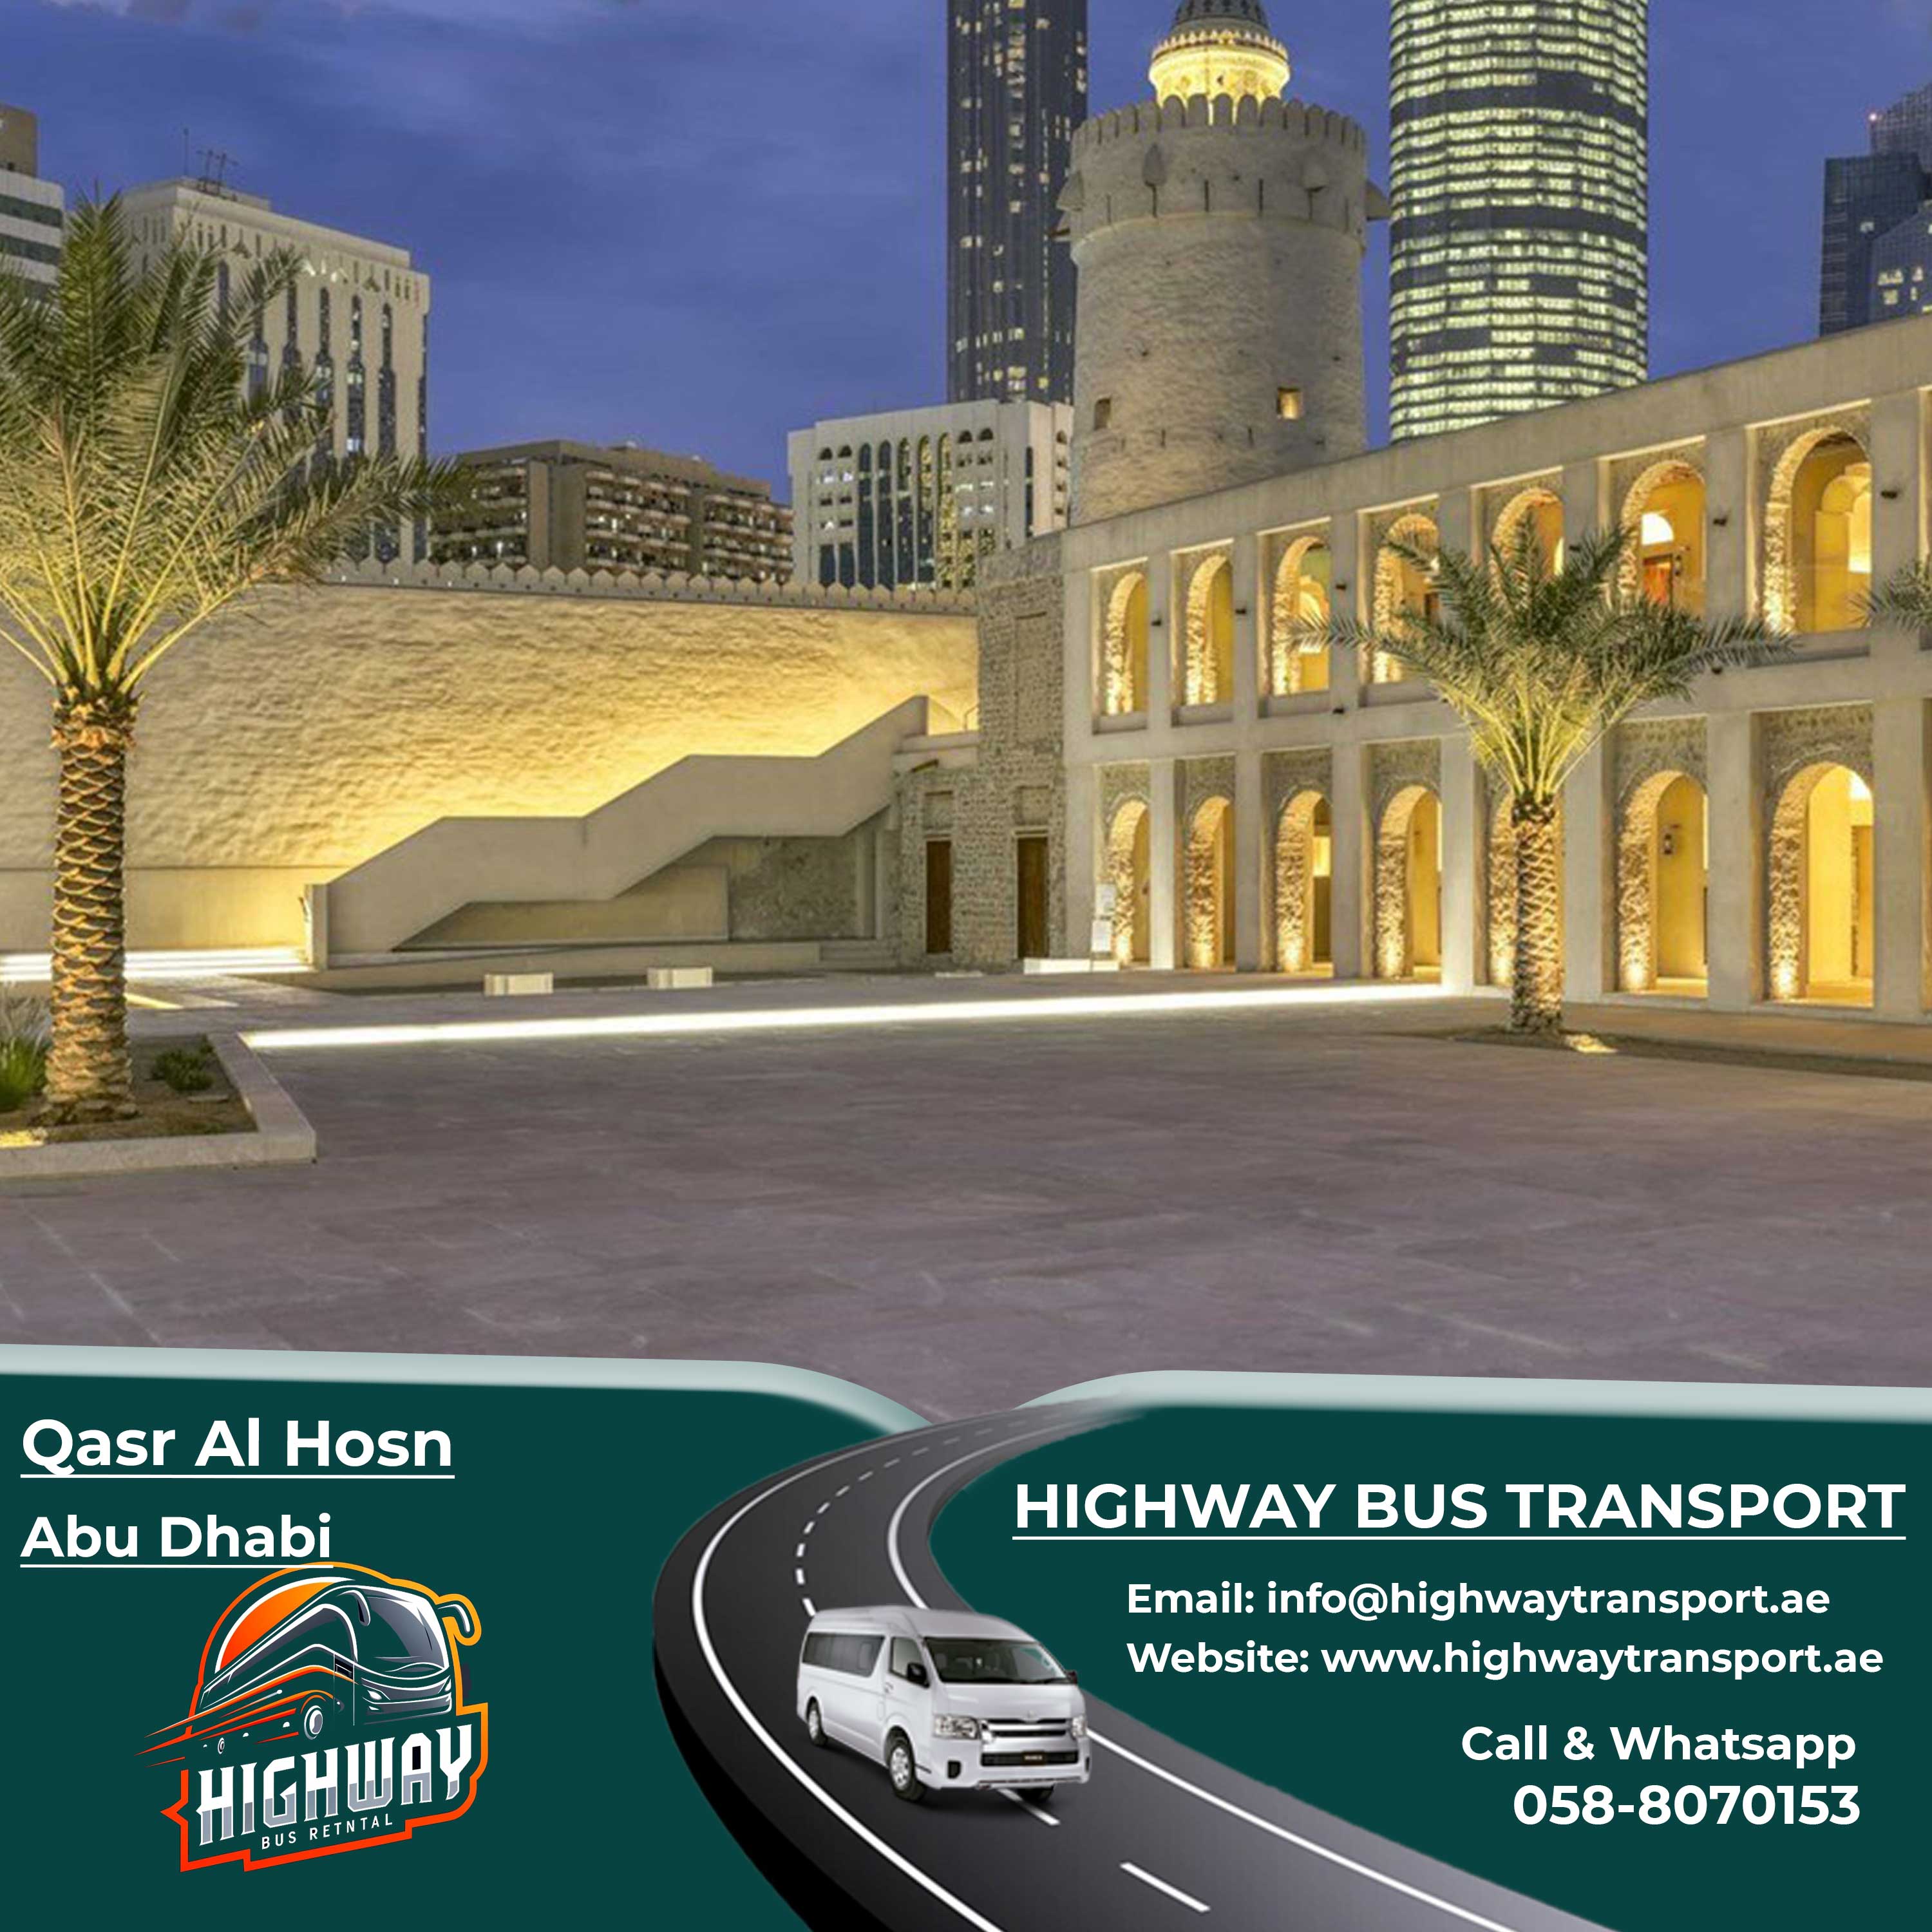 Qasr Al Hosn historic fort with rich history, opening hours, events, and tickets available